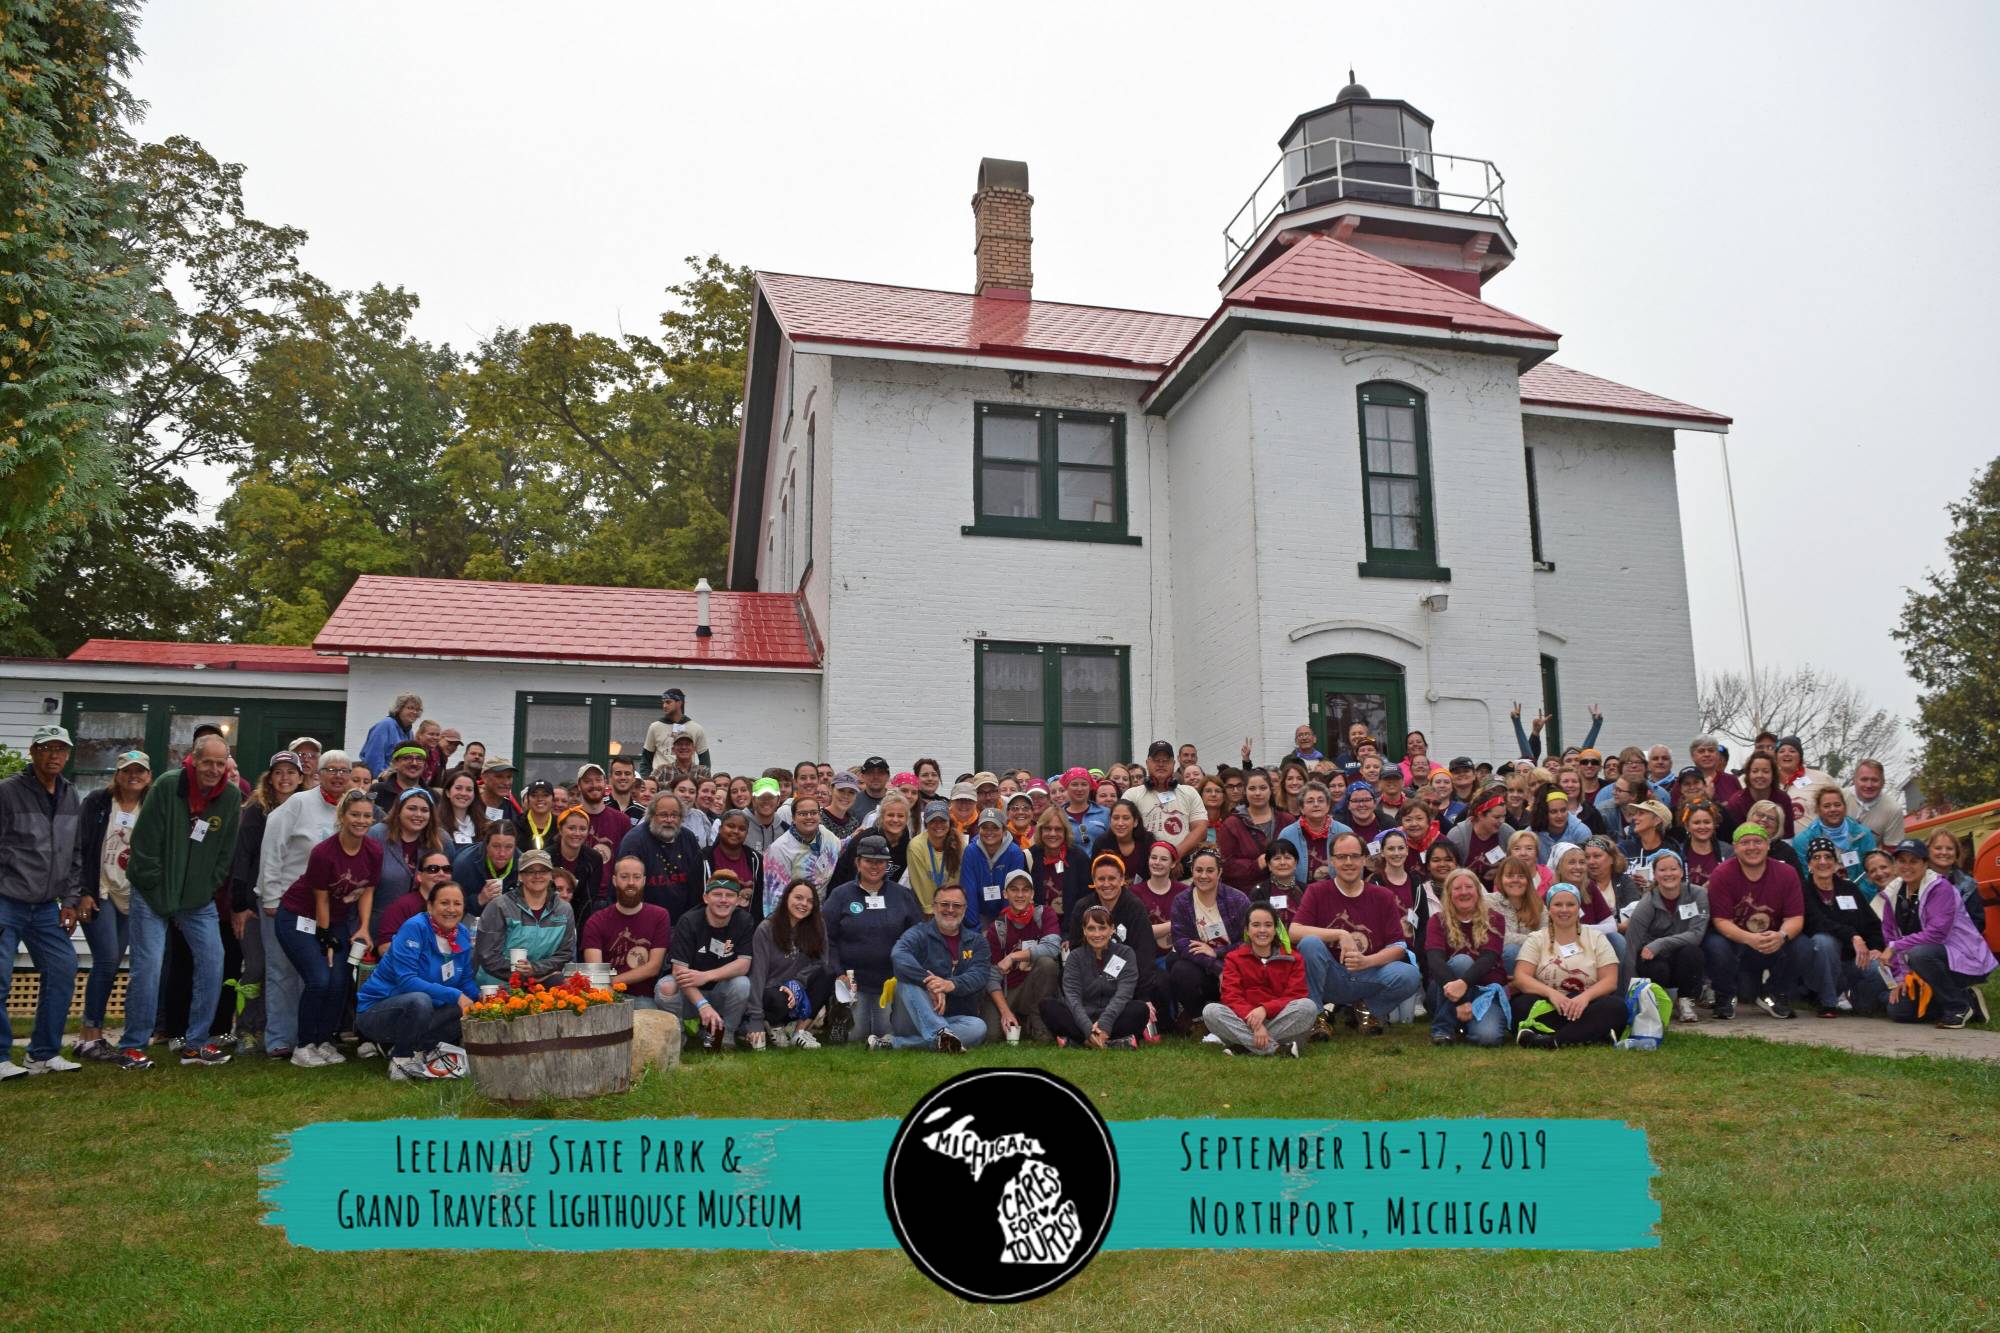 Michigan Cares for Tourism Clean-up Event 2018 at Leelanau State Park